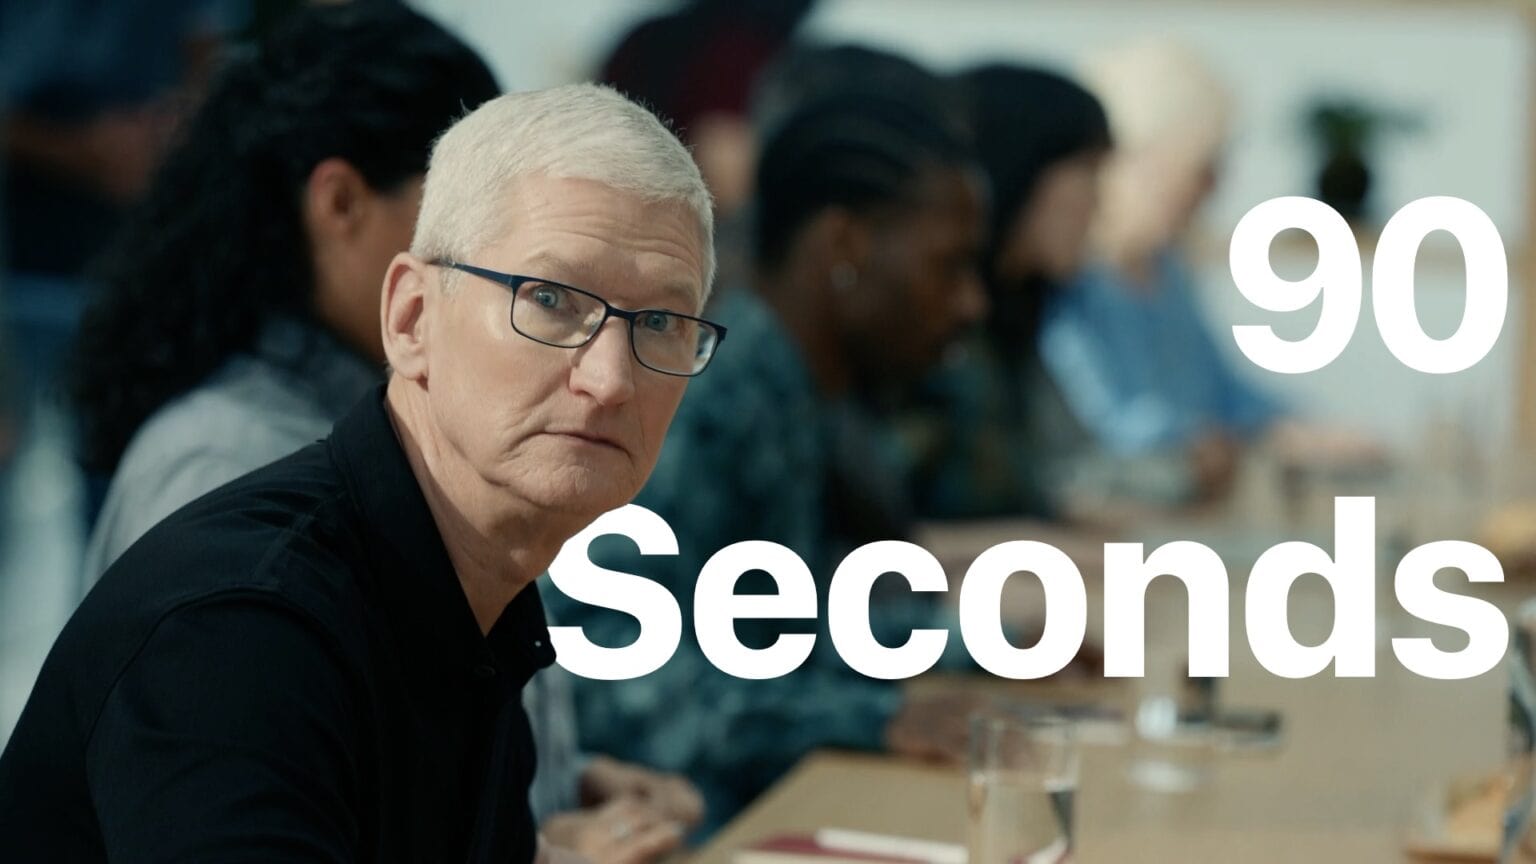 Closeup of Tim Cook’s face looking somewhat frightened. On-screen text: “90 Seconds.”